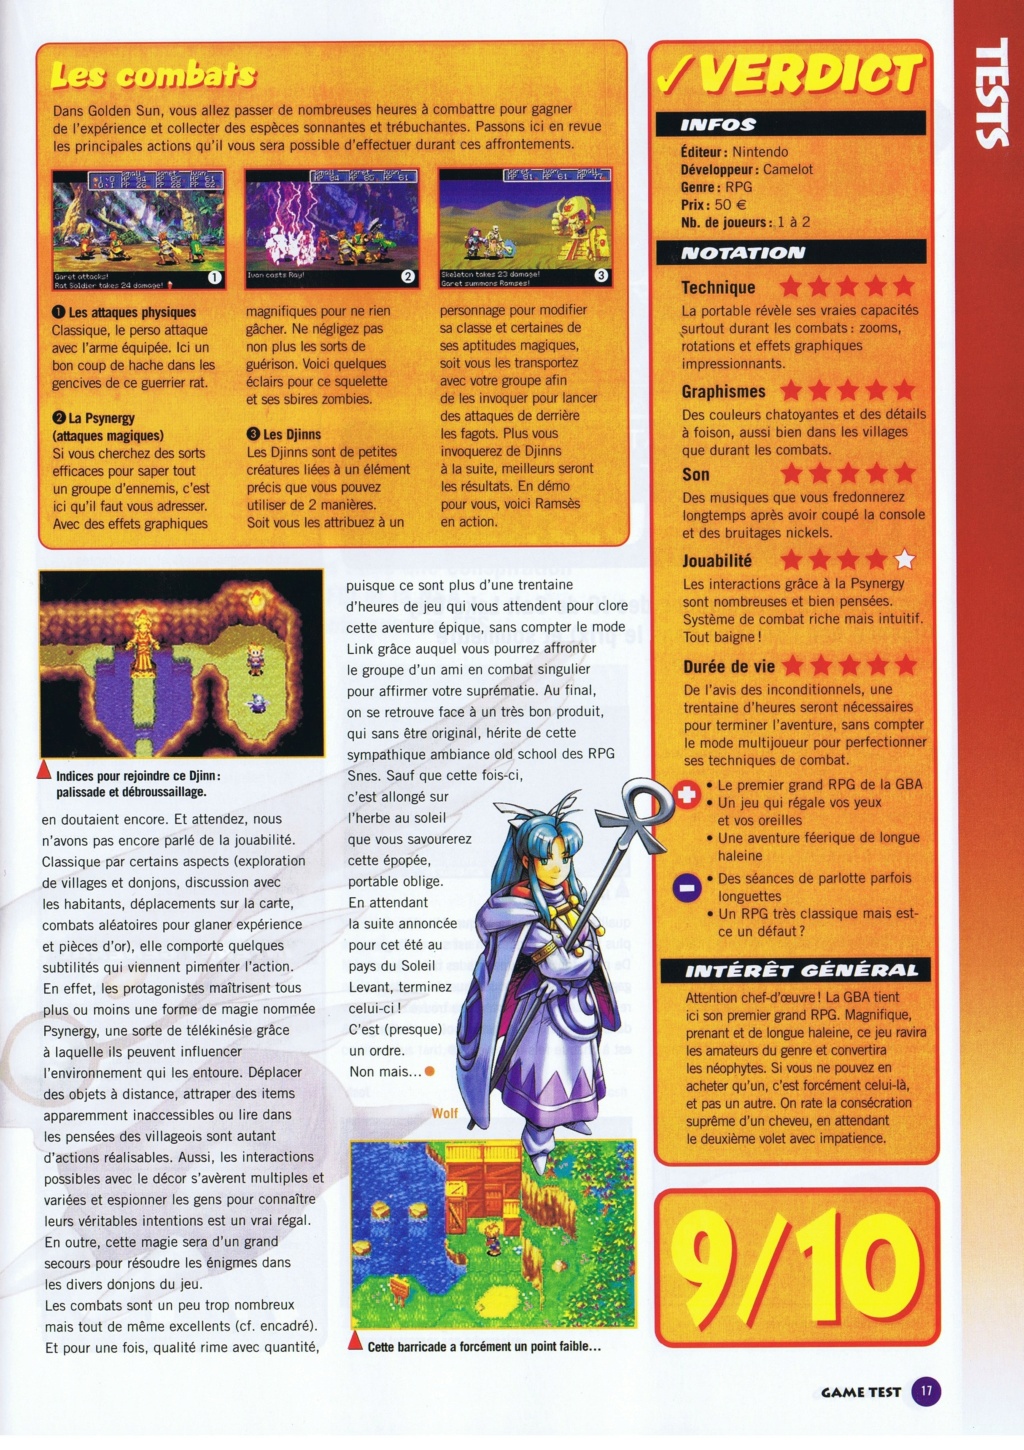 Golden Sun for ever!  - Page 3 Gamete11